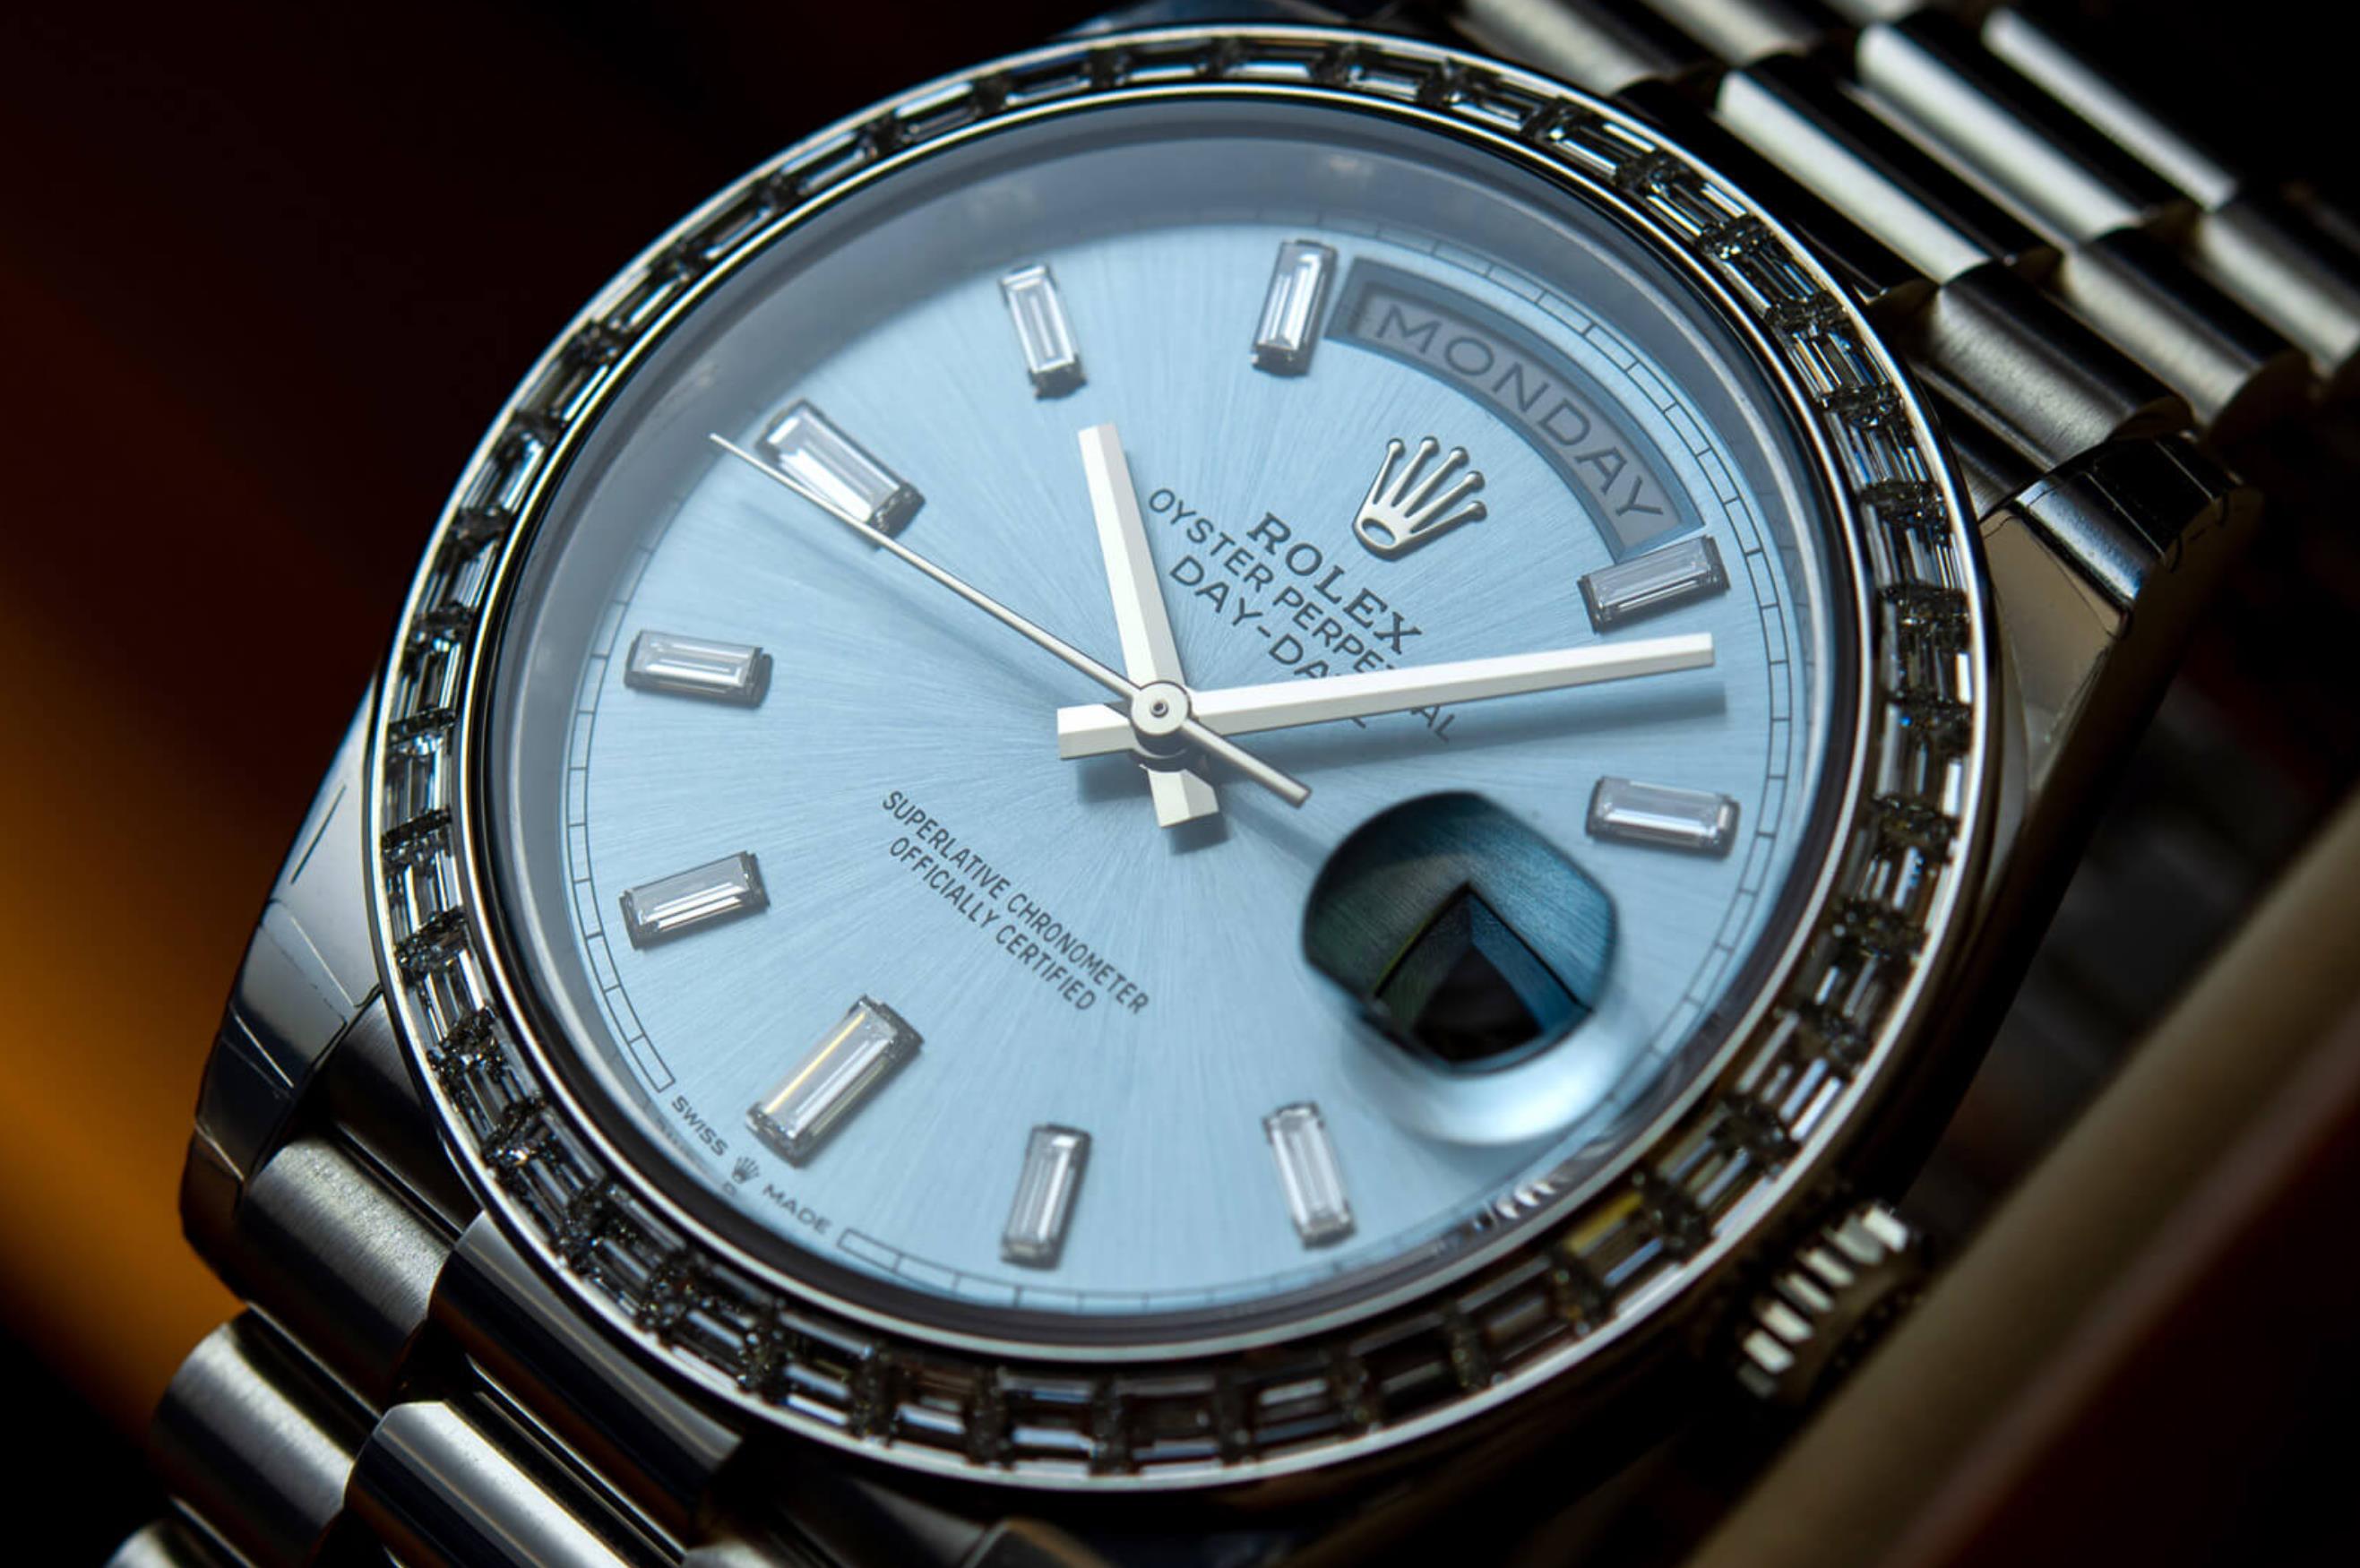 The 40mm fake watch has an ice blue dial.